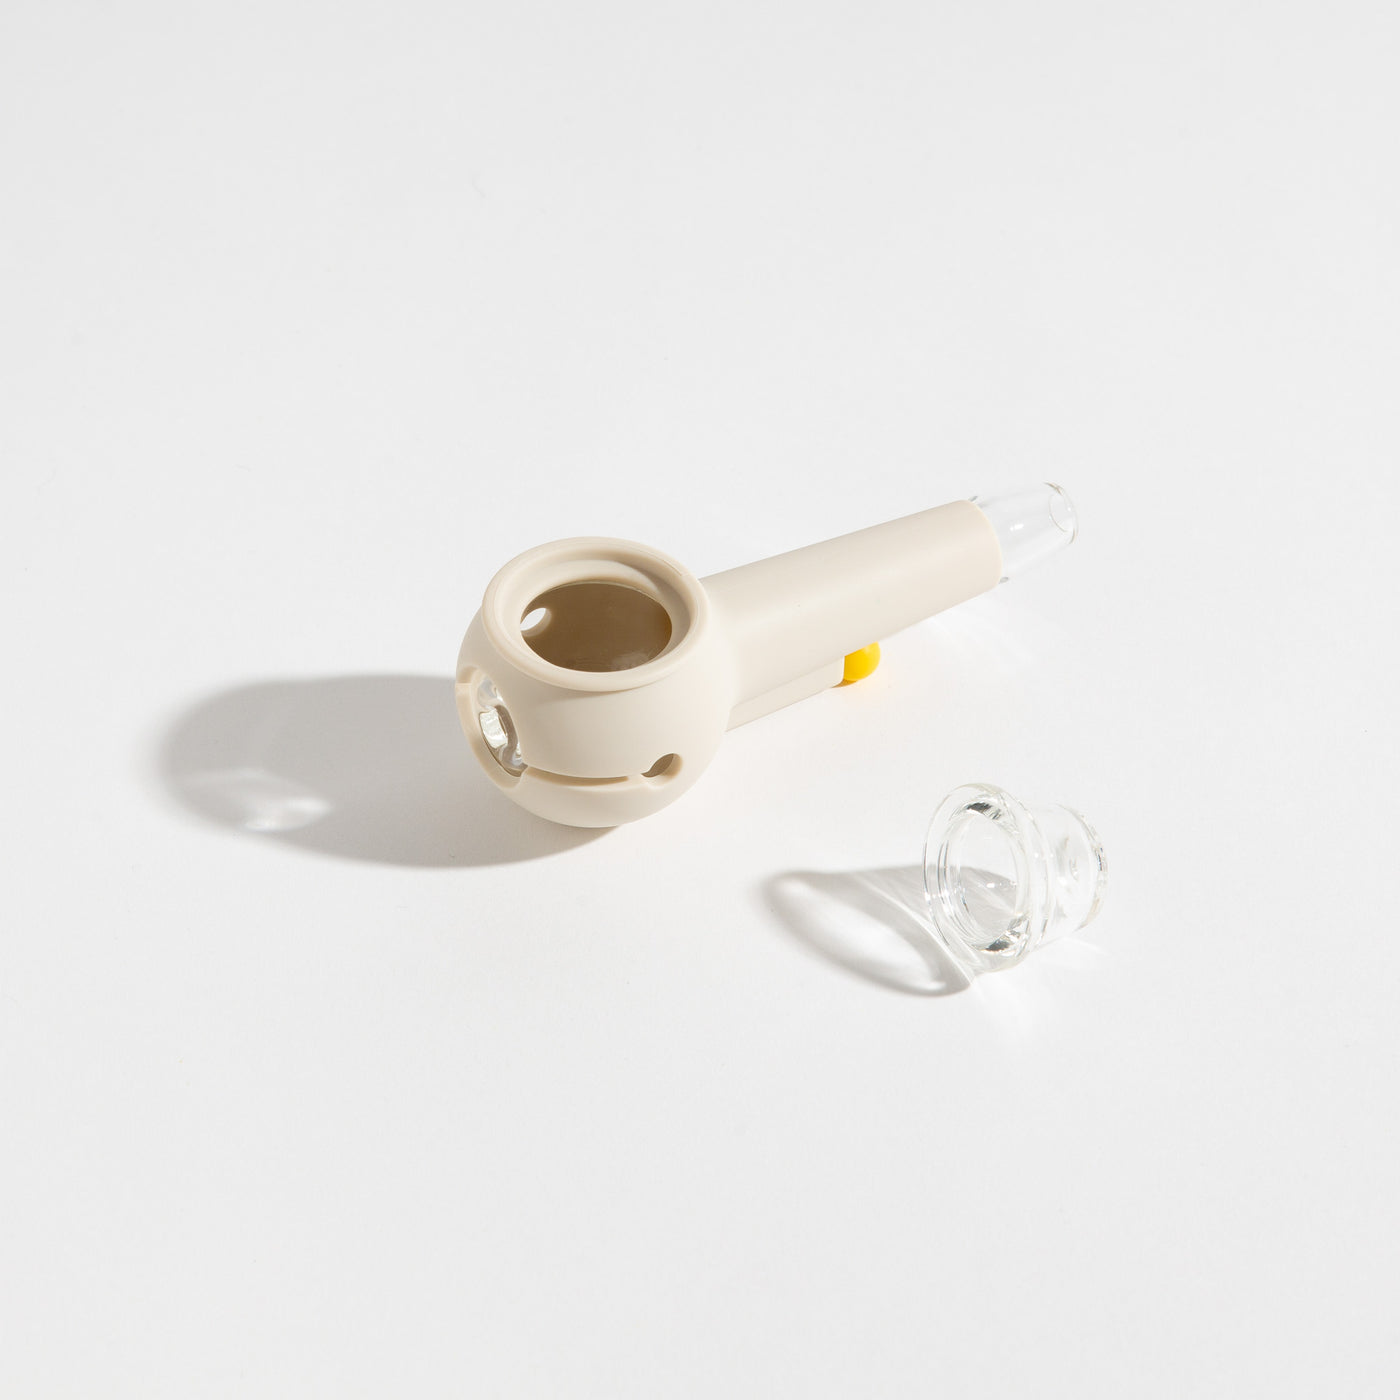 Cream white silicone pipe with detachable glass bowl on a white background.